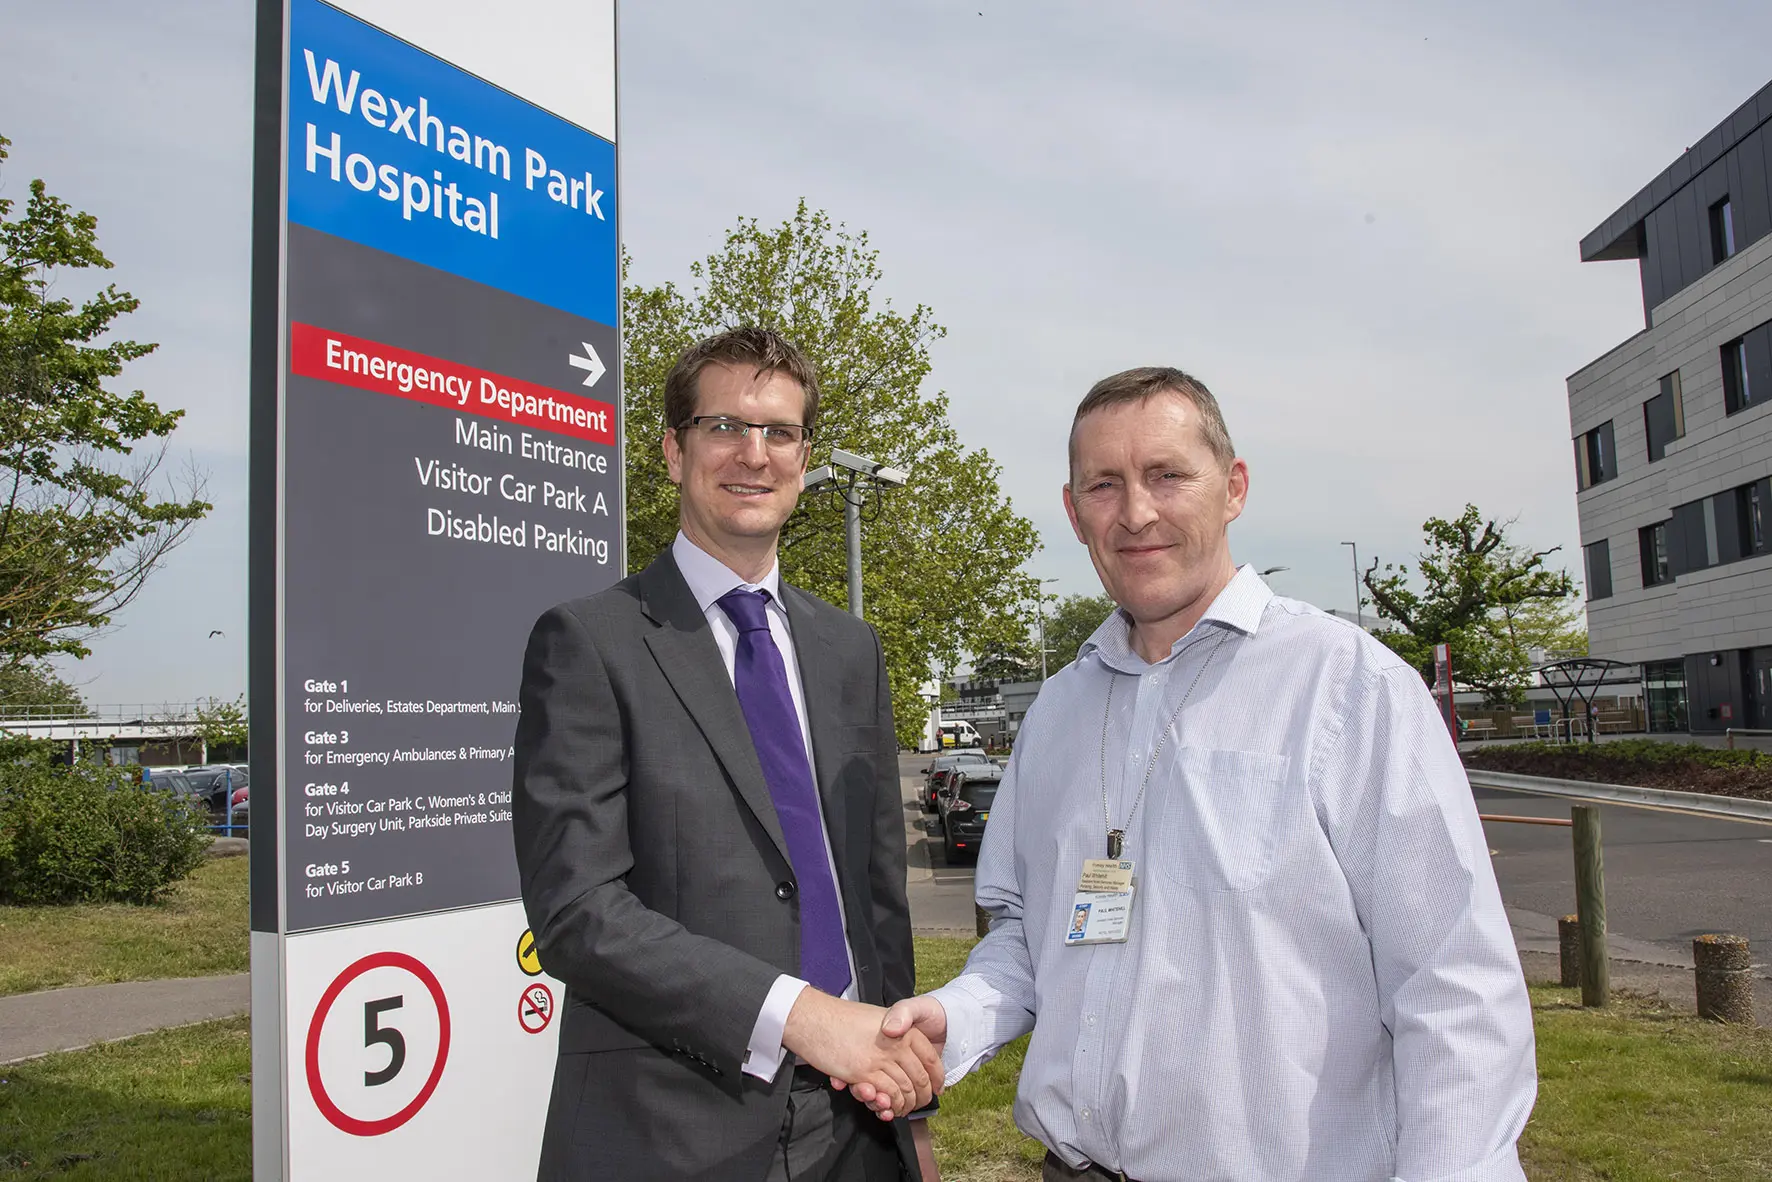 James Killick, Compliance Advisor at Grundon, pictured with Paul Whitehill, Assistant Hotel Services Manager at Wexham Park Hospital site